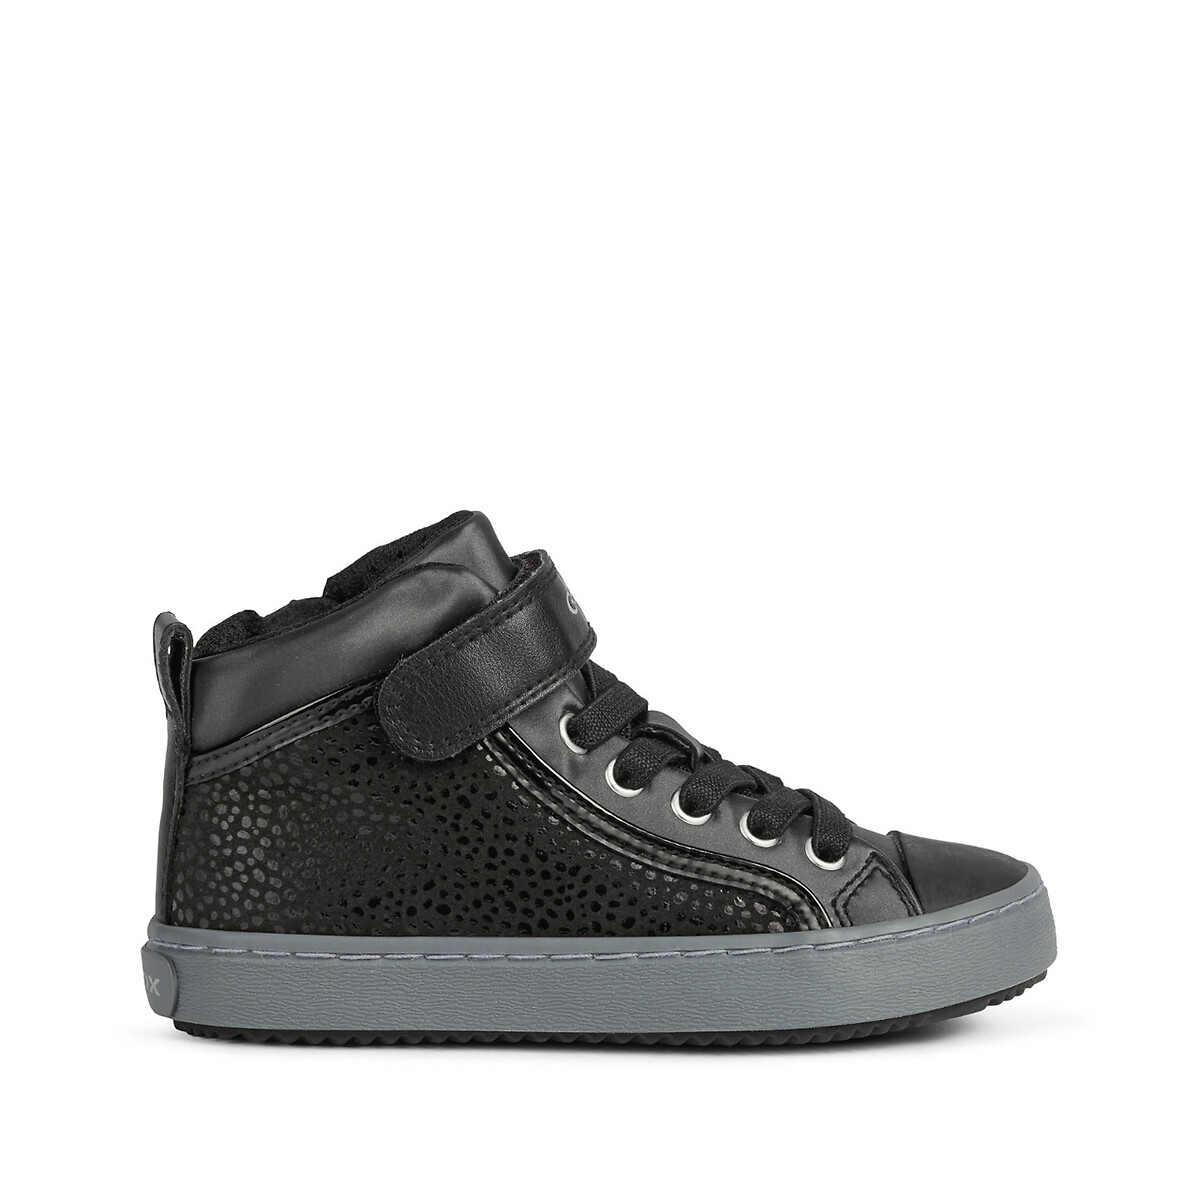 Kids Kalispera Touch ’n’ Close High Top Trainers